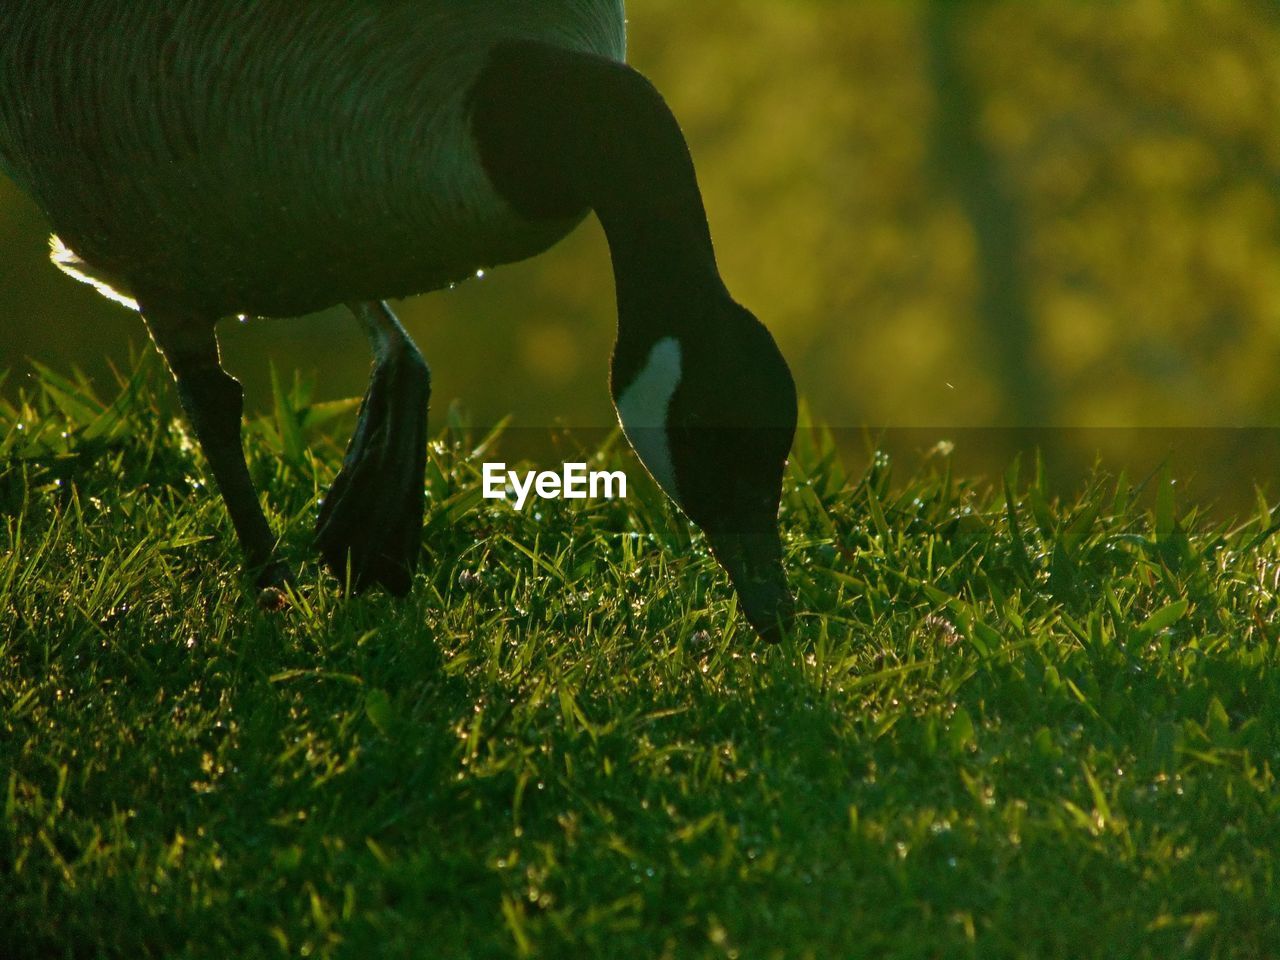 A goose looking for food in the grass